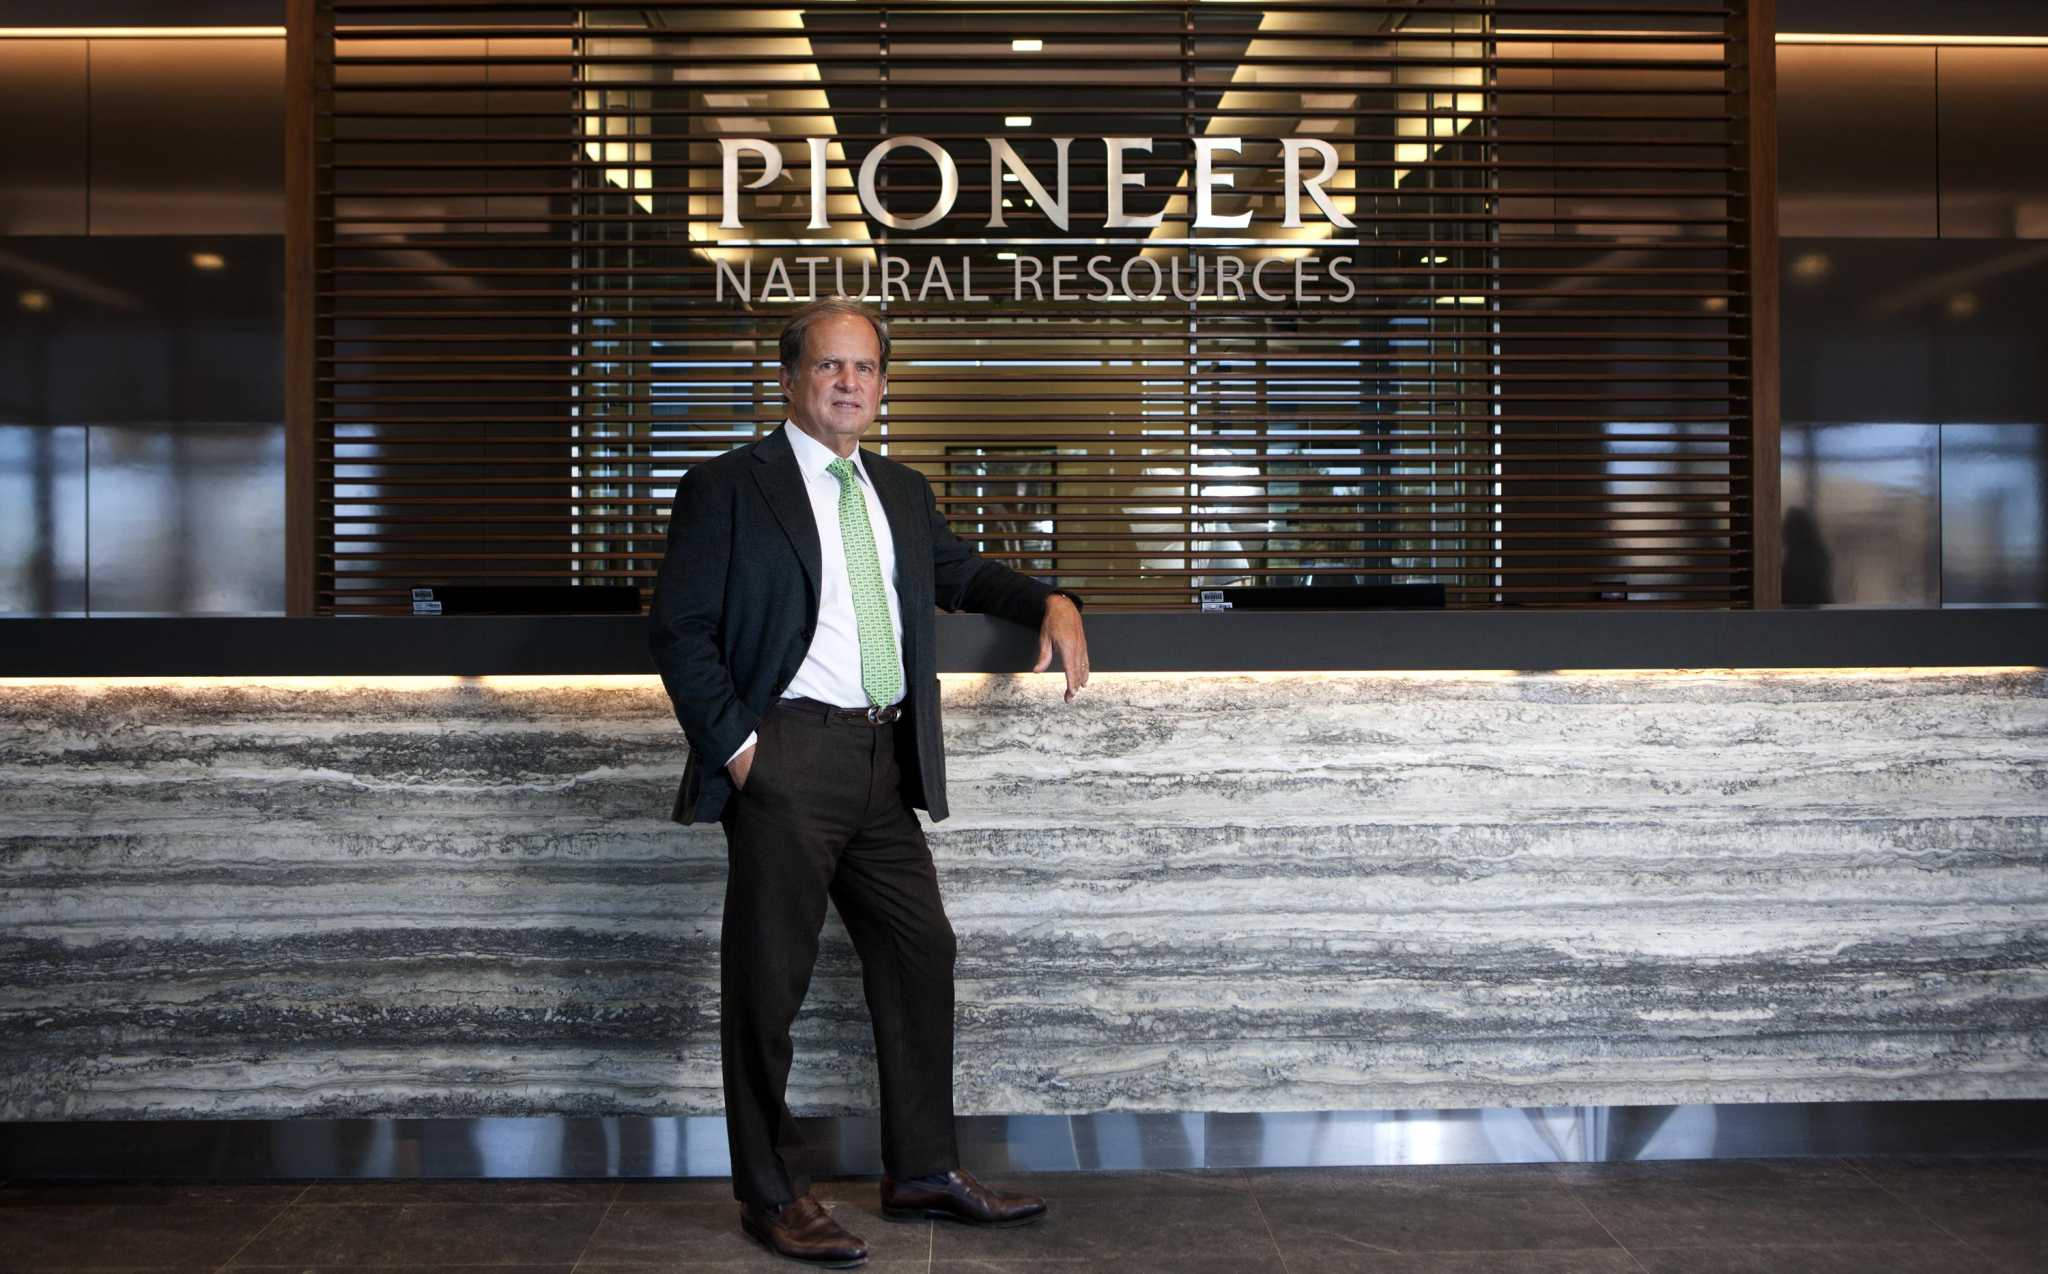 Pioneer Natural Resources to acquire Parsley Energy in $4.5B deal